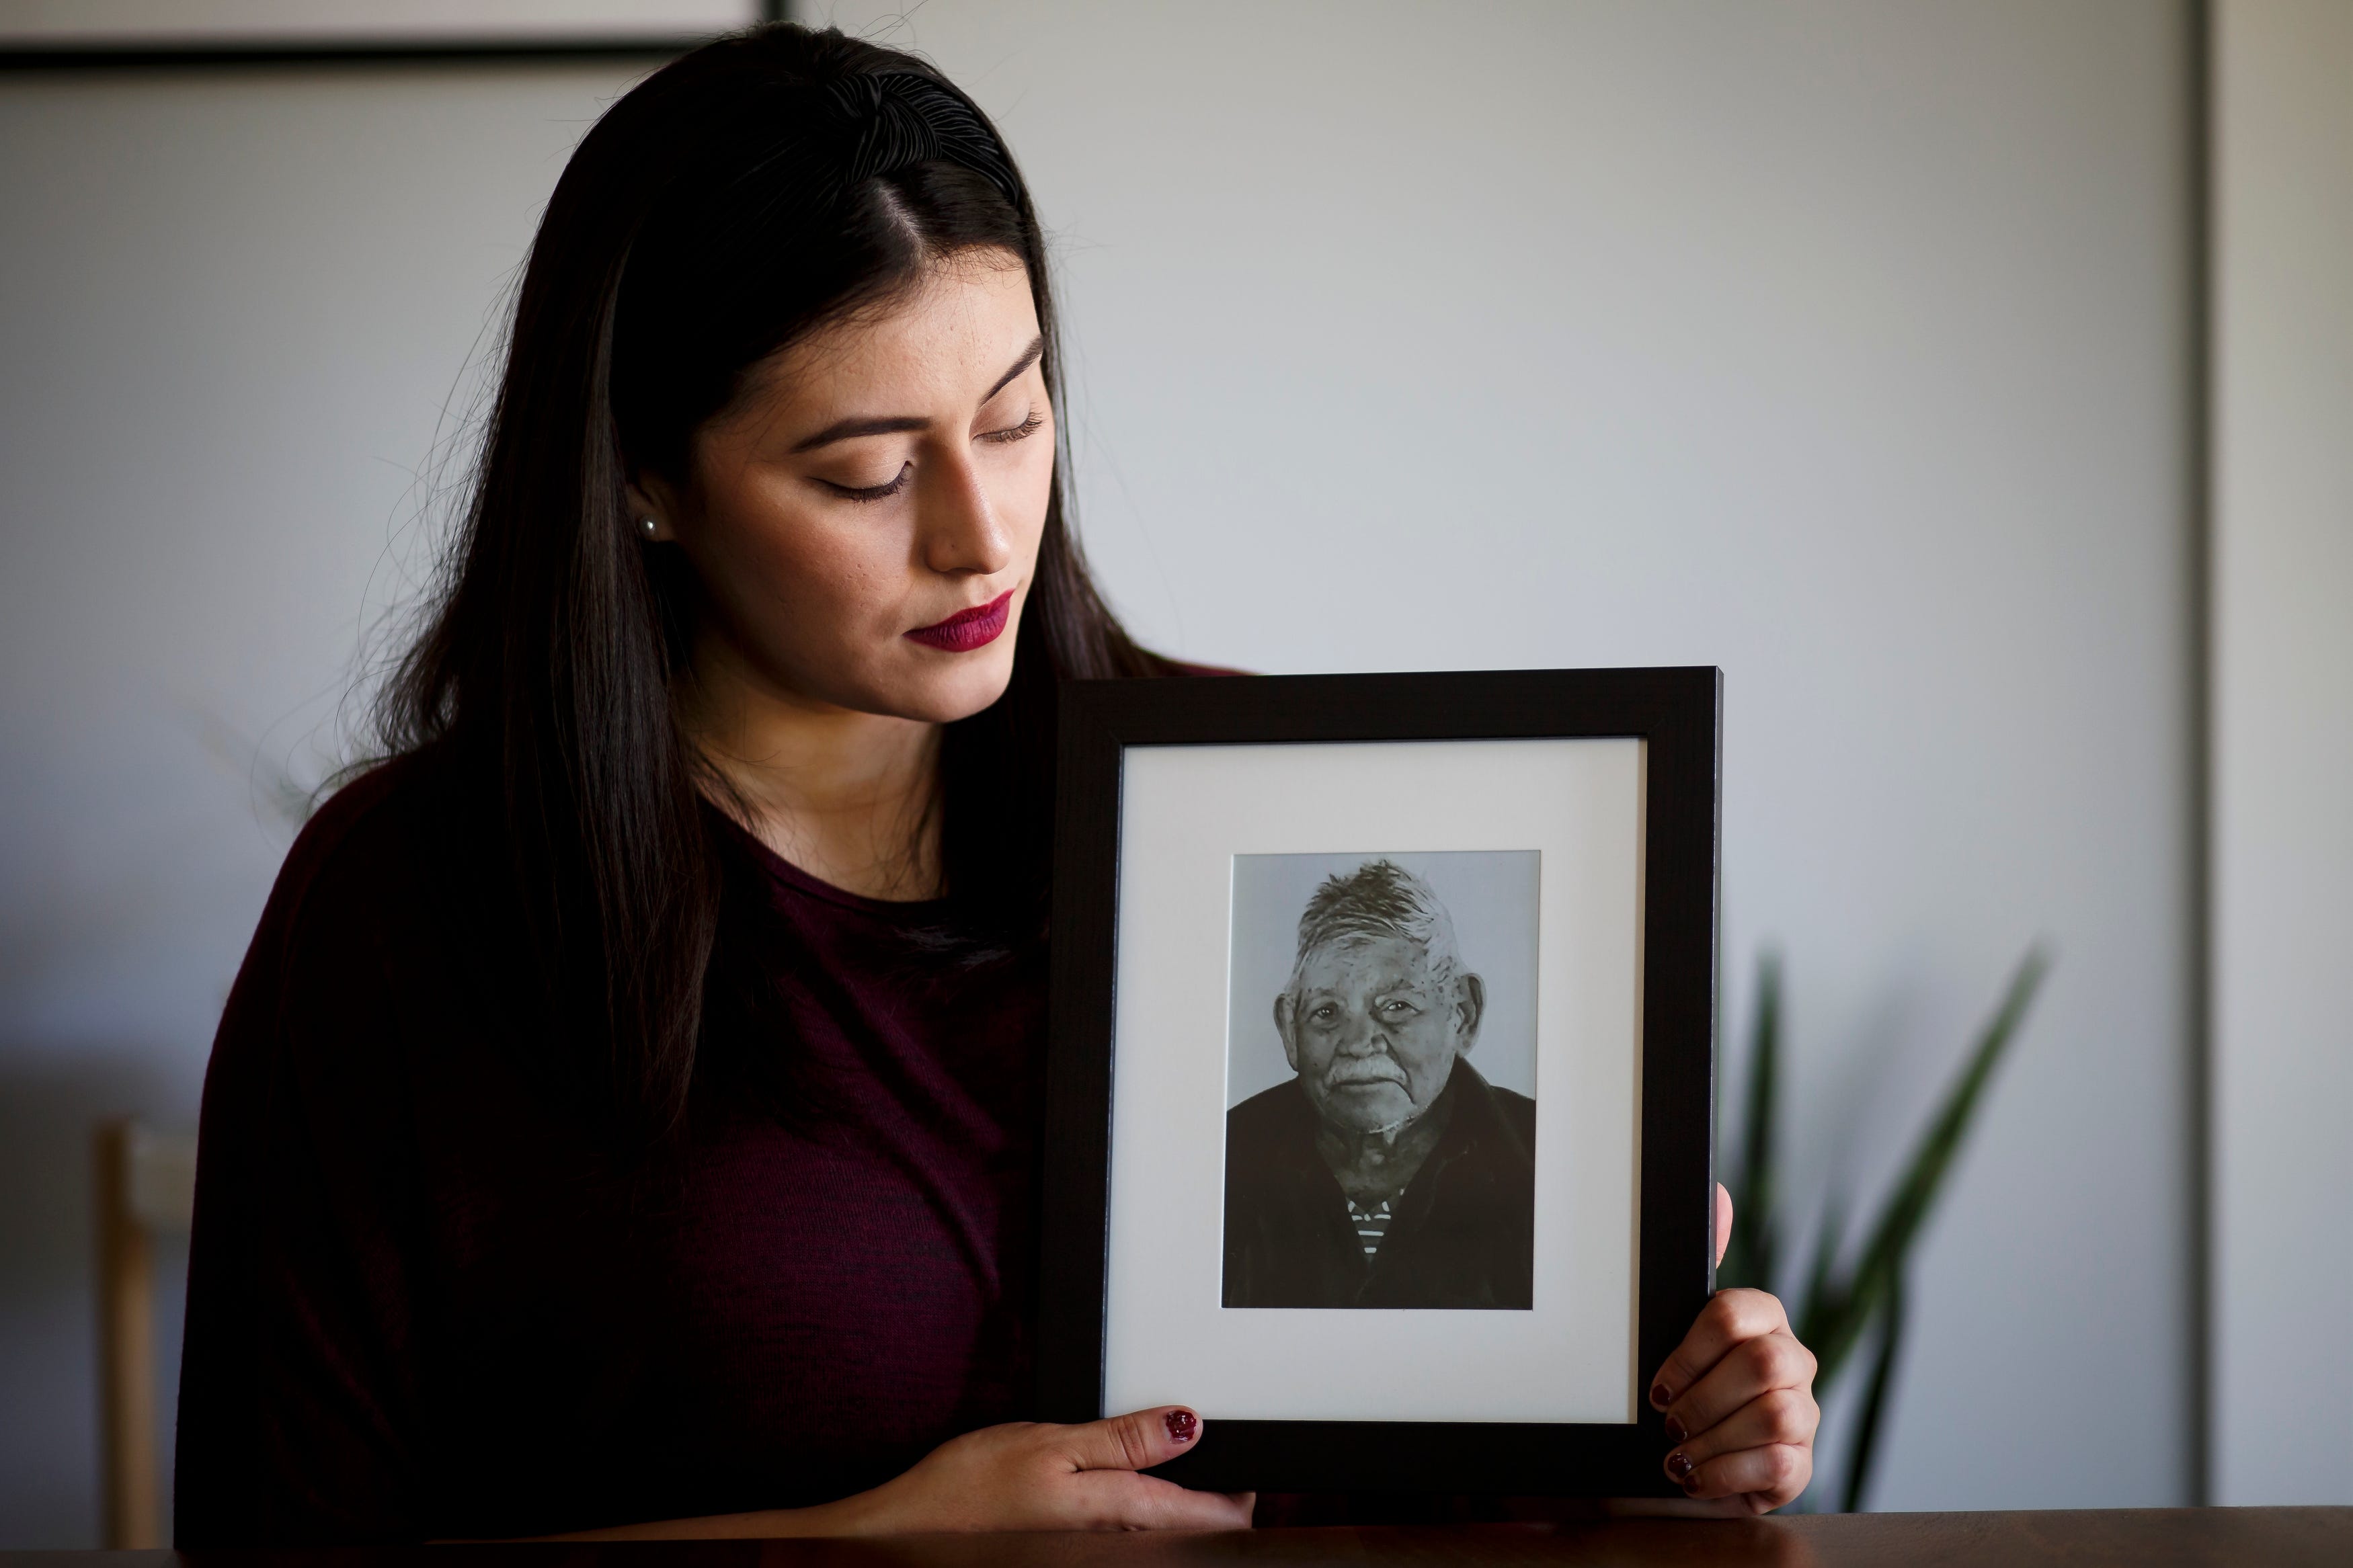 Veronica Guevara's grandfather Jose Dolores Guevara Ramirez died of COVID-19 in May. Jose raised 12 children in Mexico before most of them moved to Marshalltown.